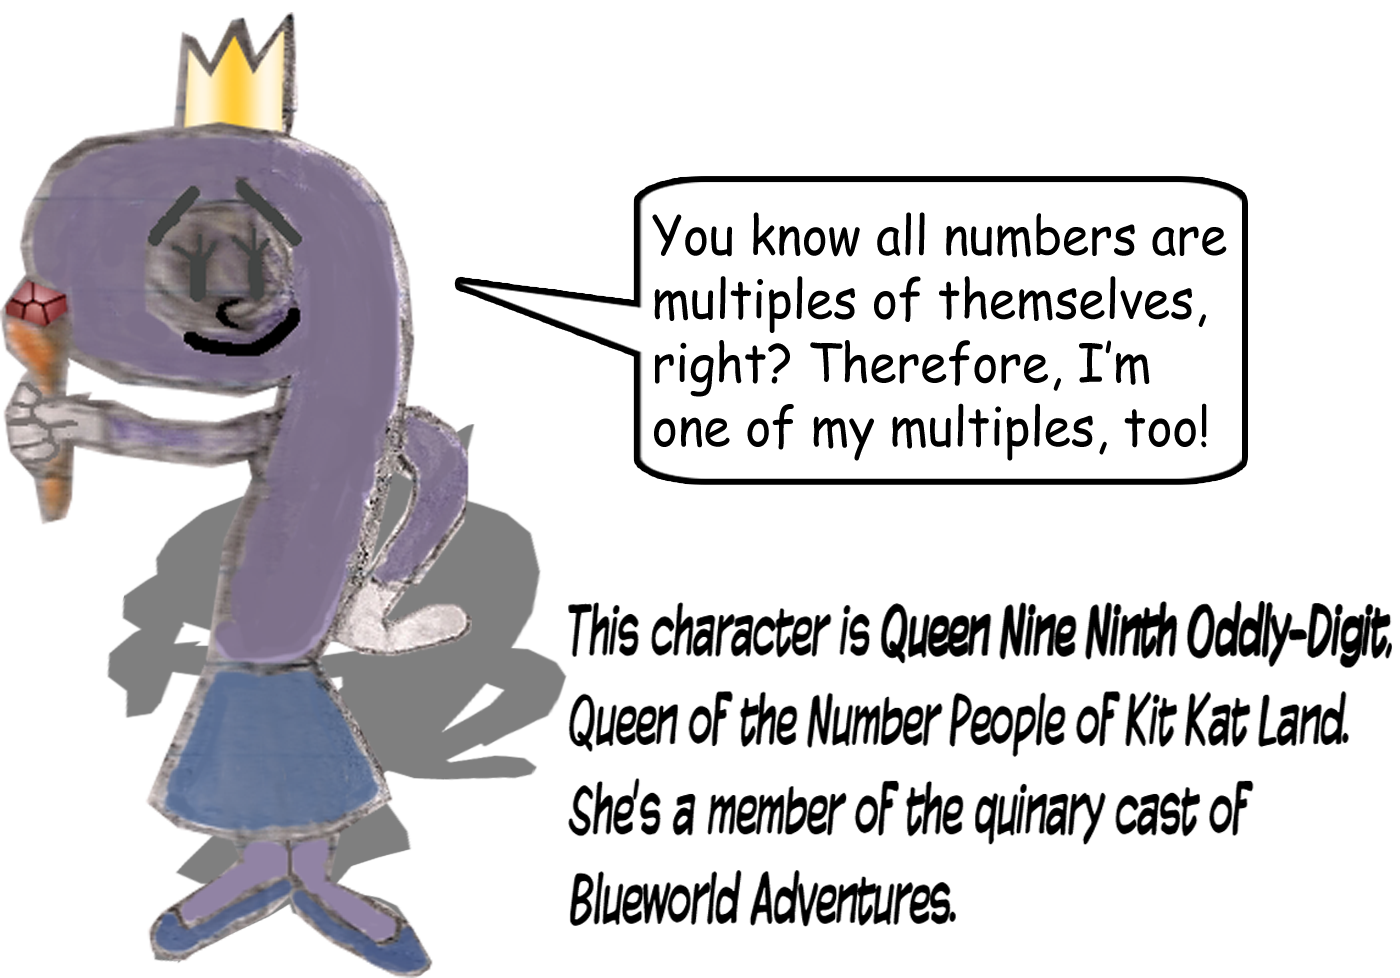 All numbers are multiples of themselves.